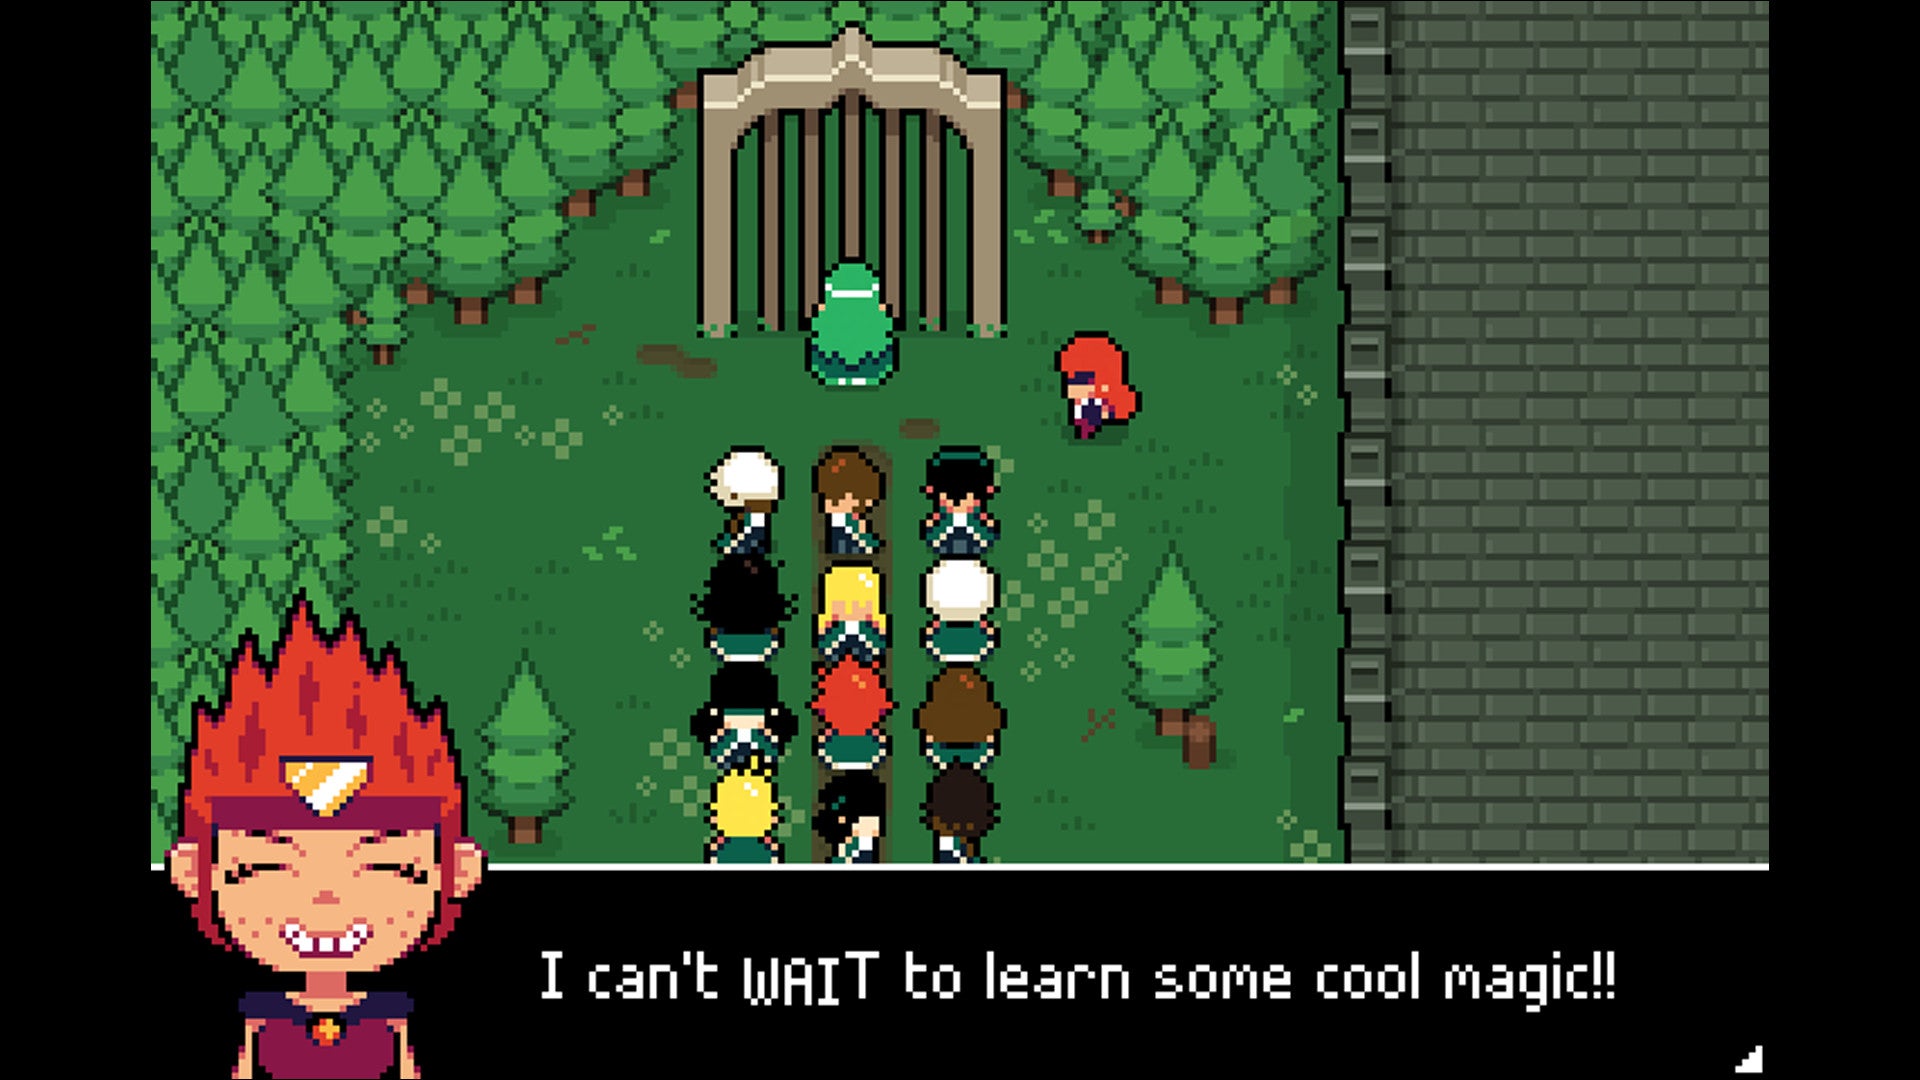 A screenshot of a group 2D pixelart scene in Ikenfell, as a group of students regard a barred gate that will lead to the magical school Ikenfell